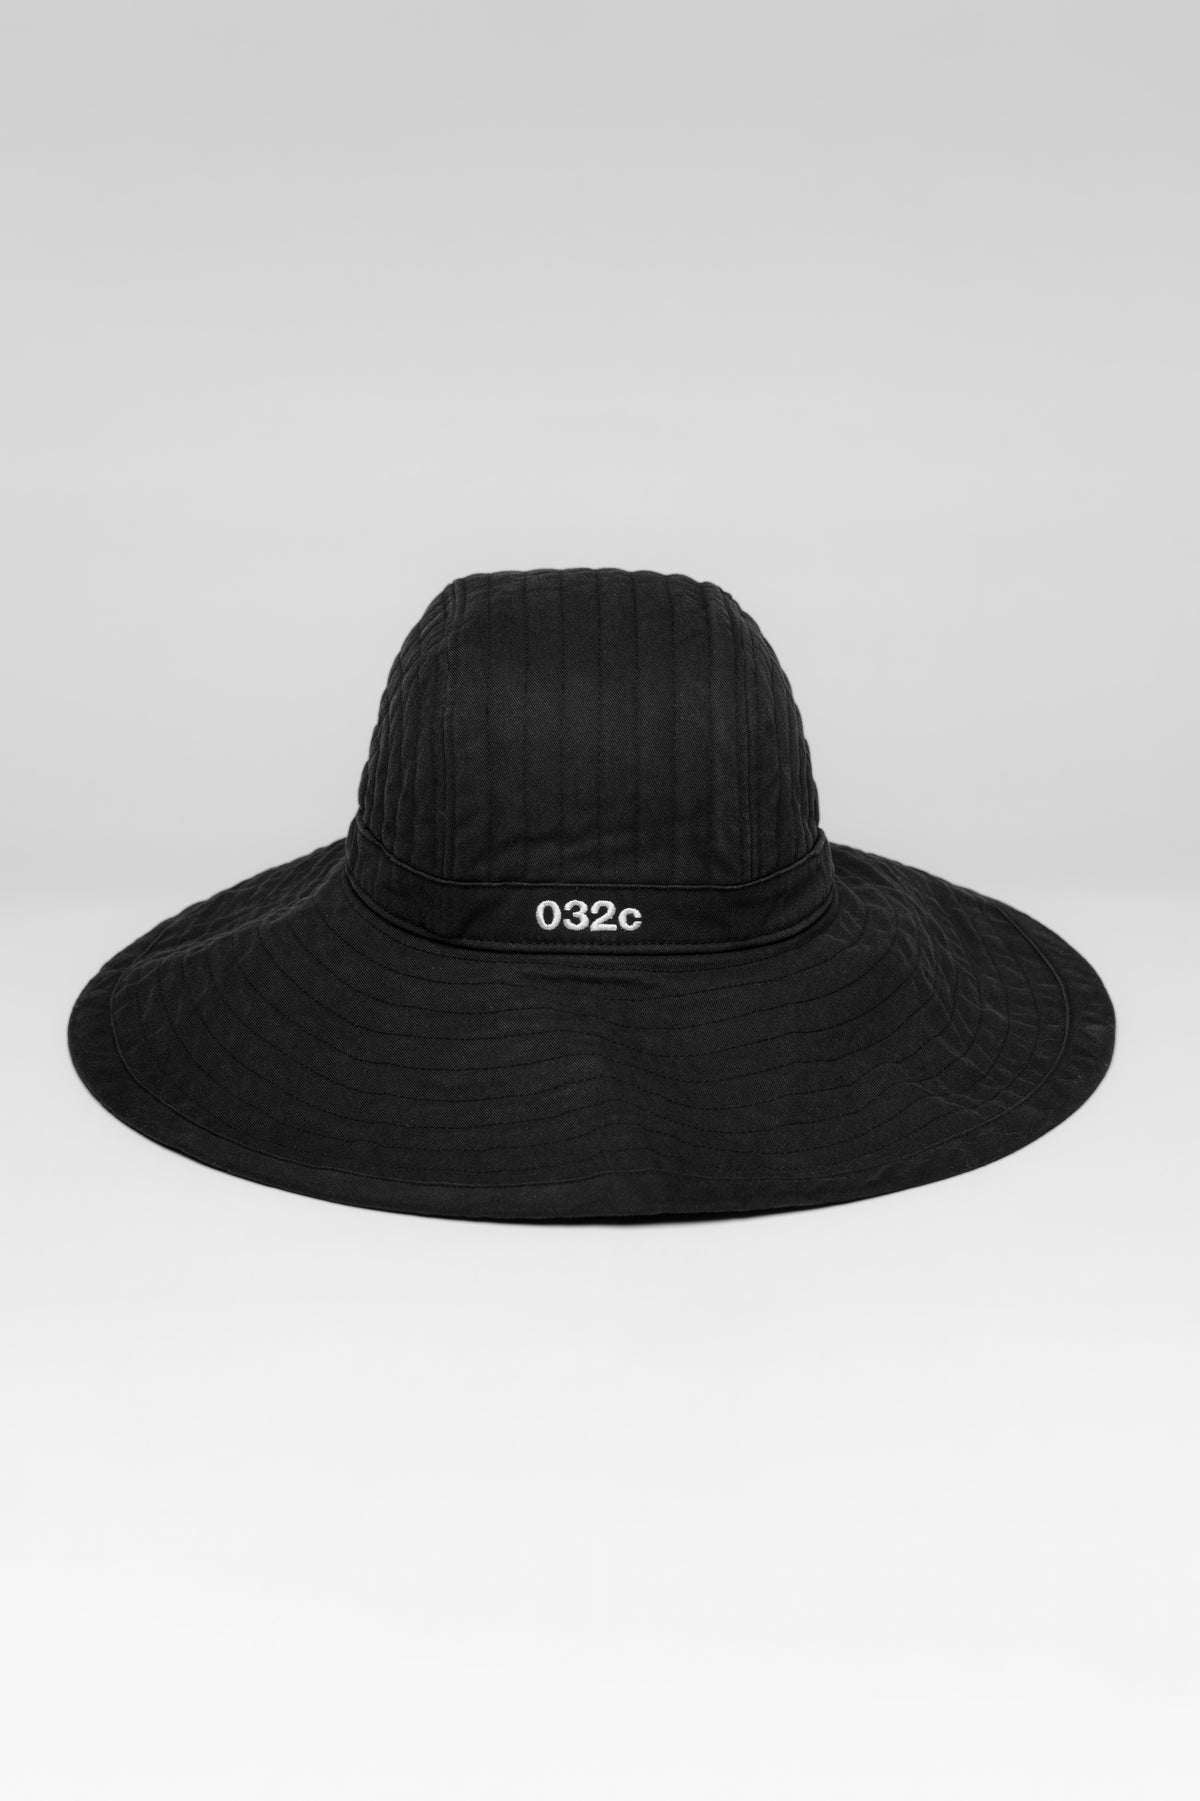 THE 032c "EURO SUMMER" HAT